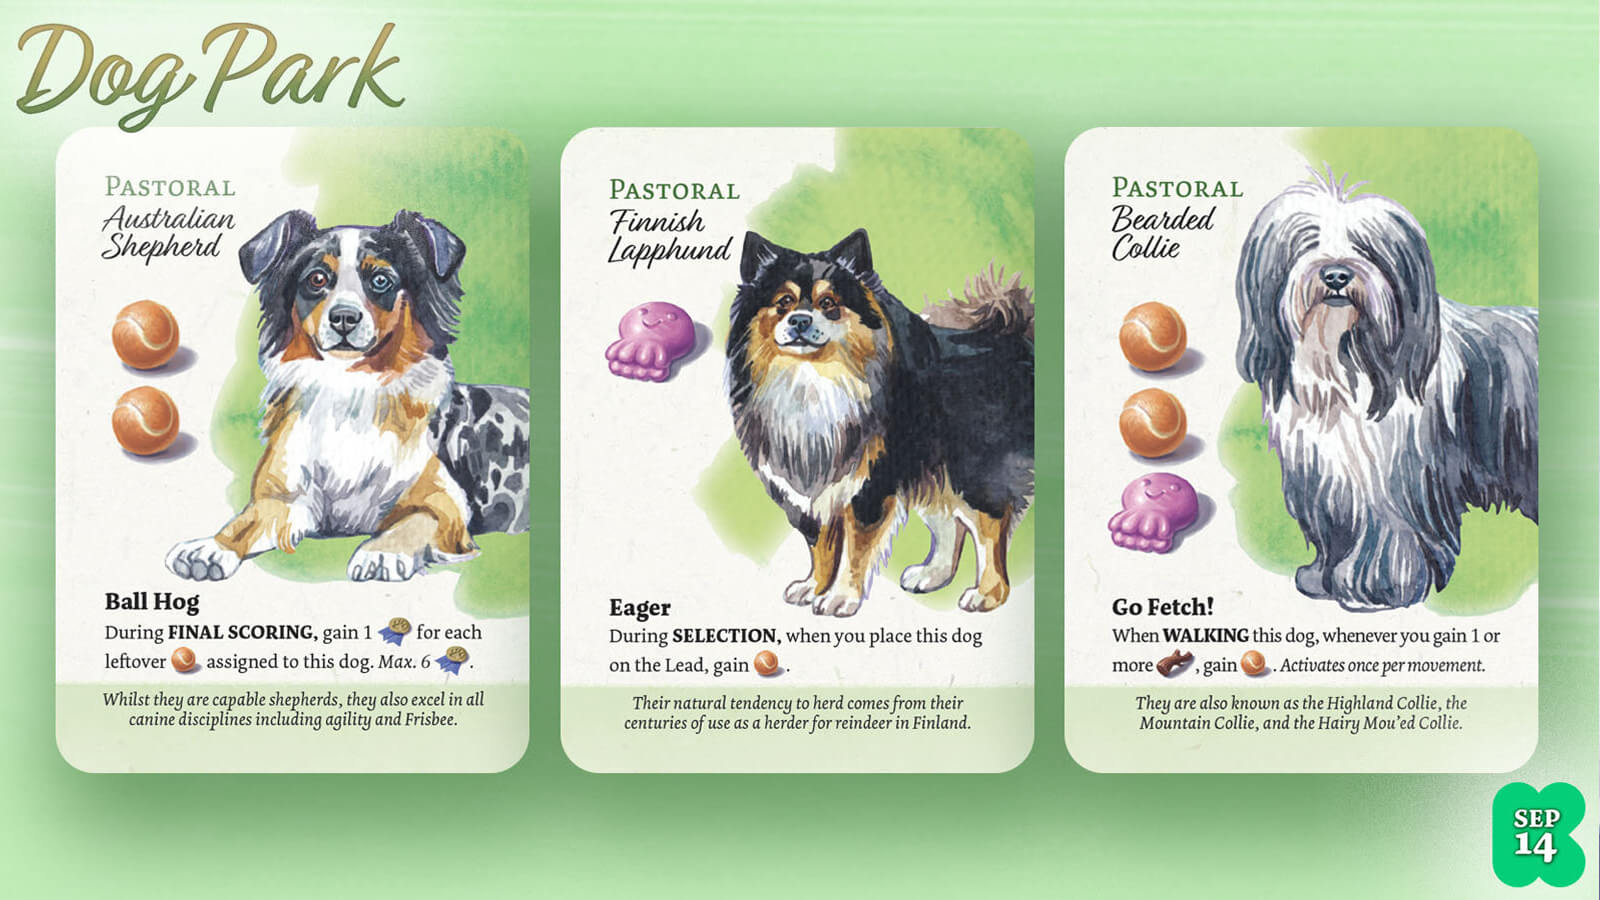 Meet the Dogs: A Designer Diary on Board Game Geek